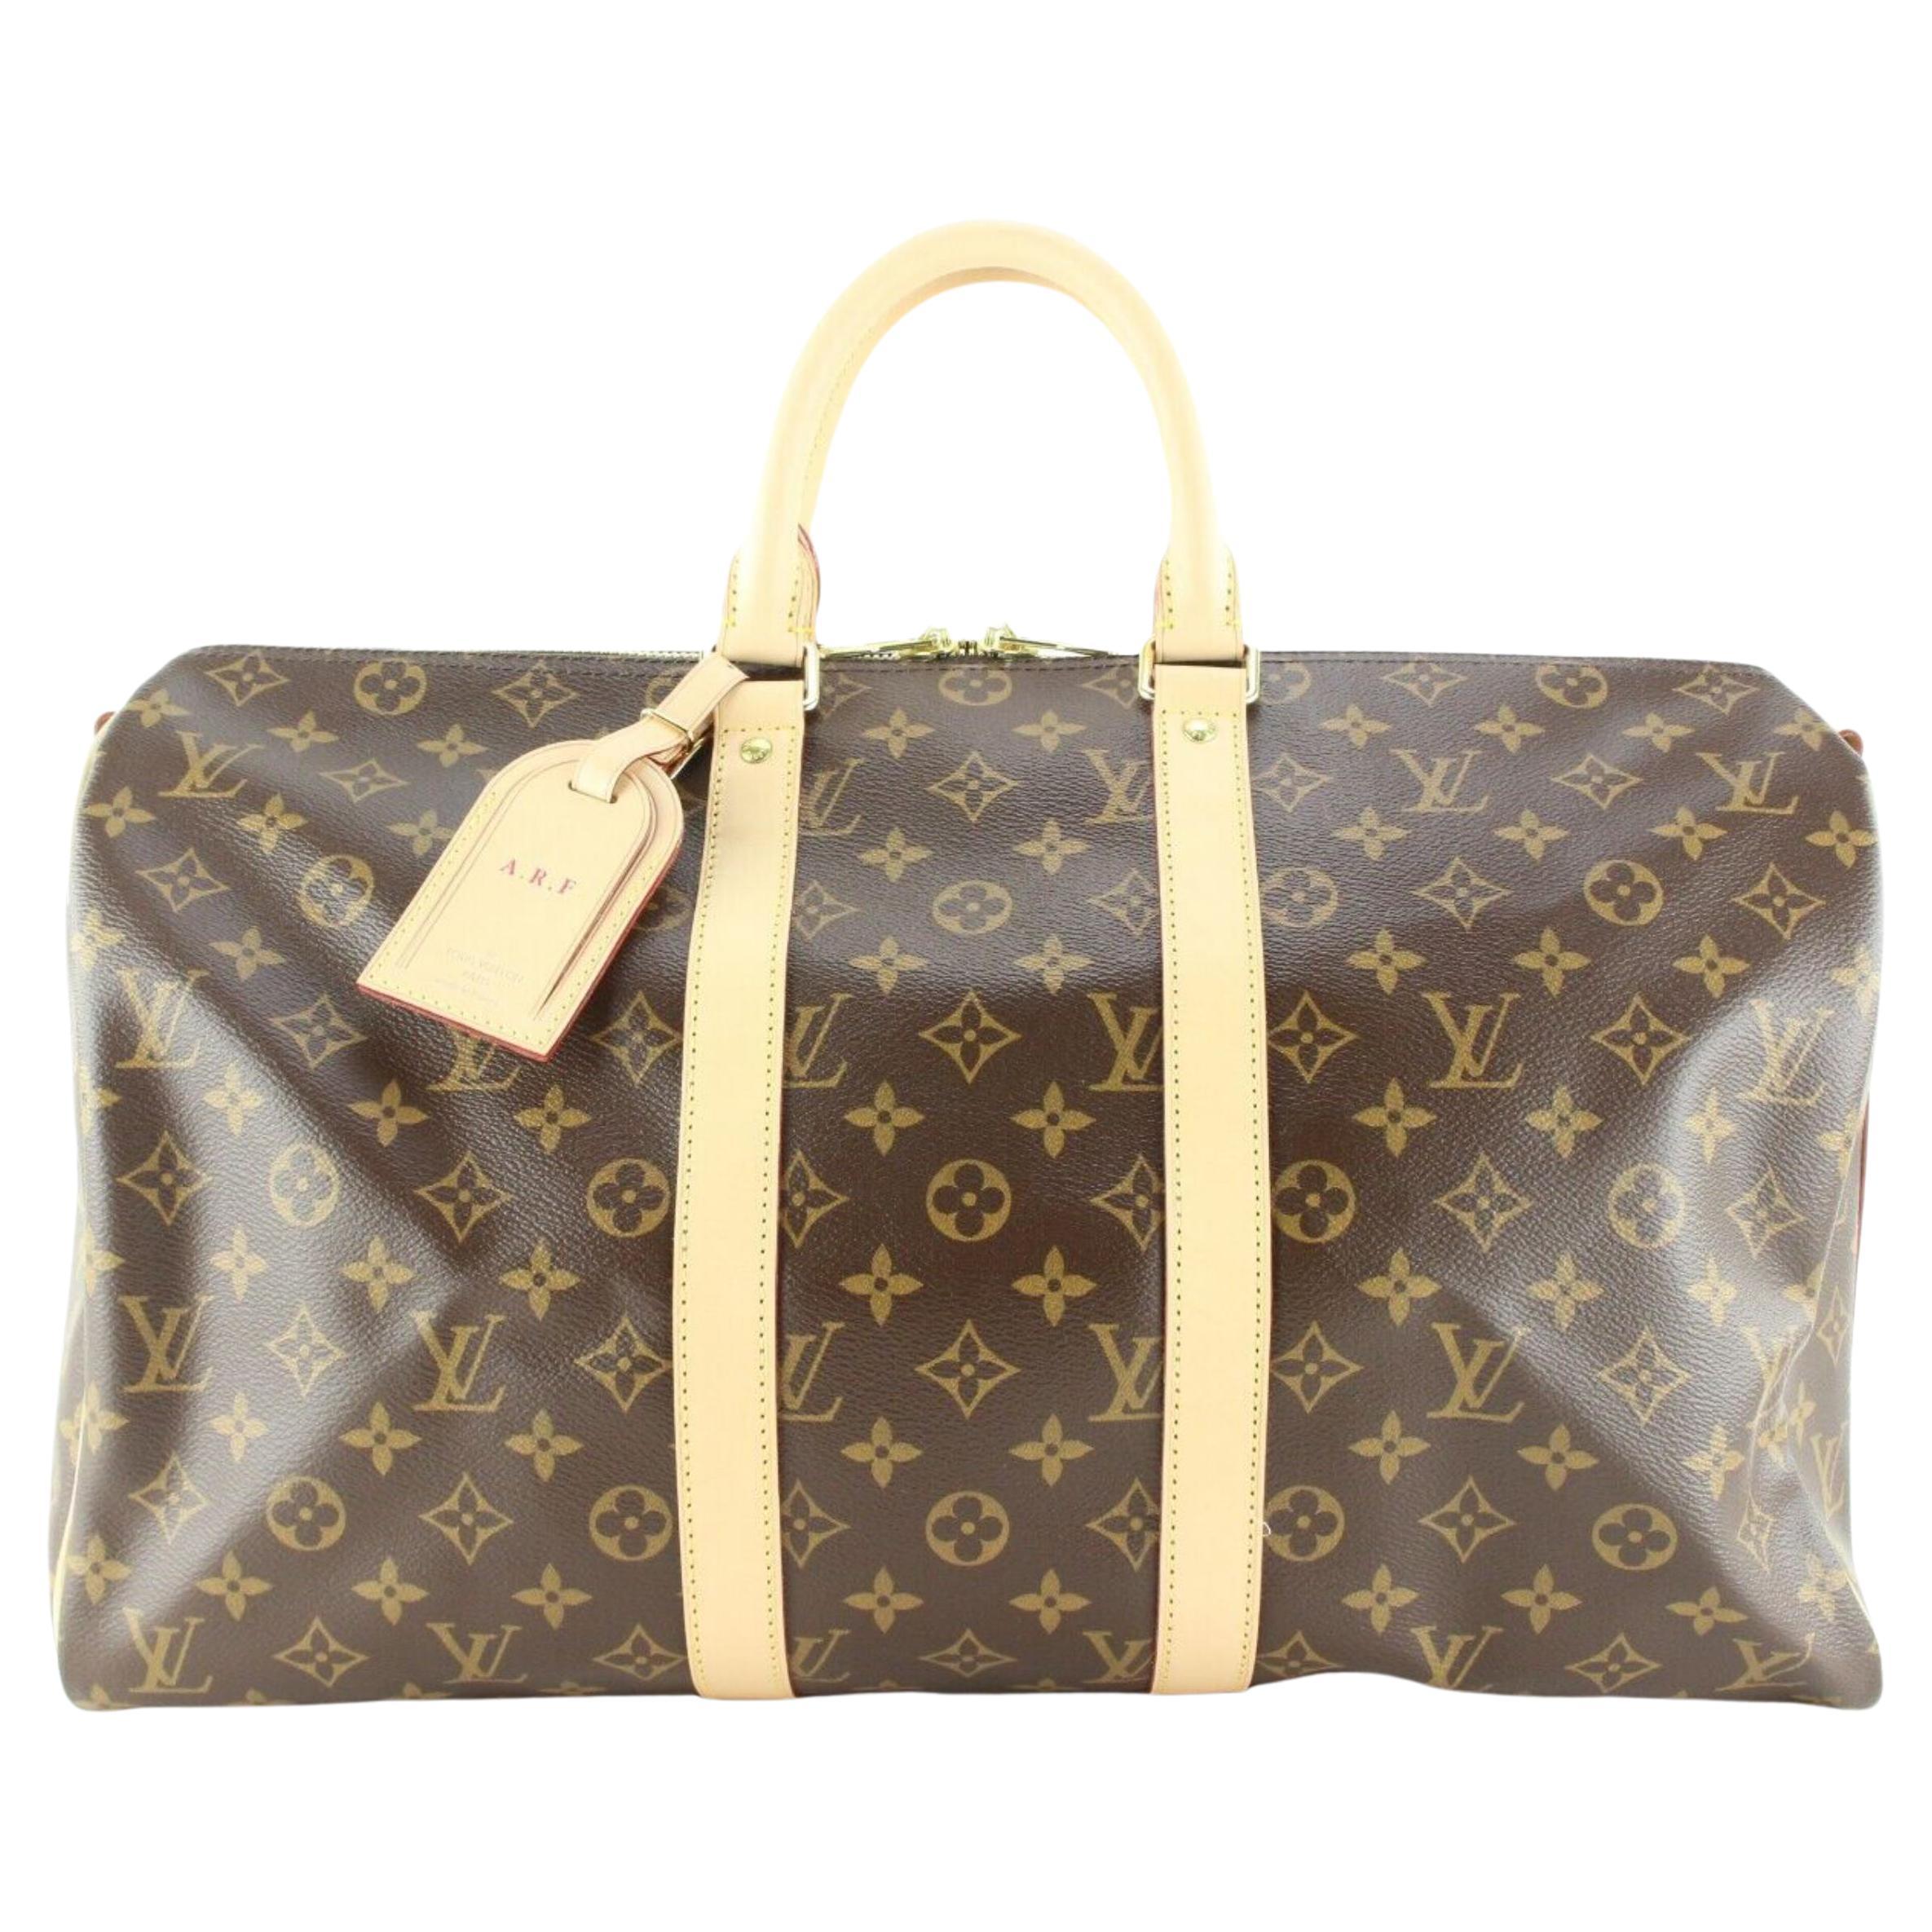 Louis Vuitton Monogram Keepall Bandouliere 45 Duffle with Strap 5LK0222